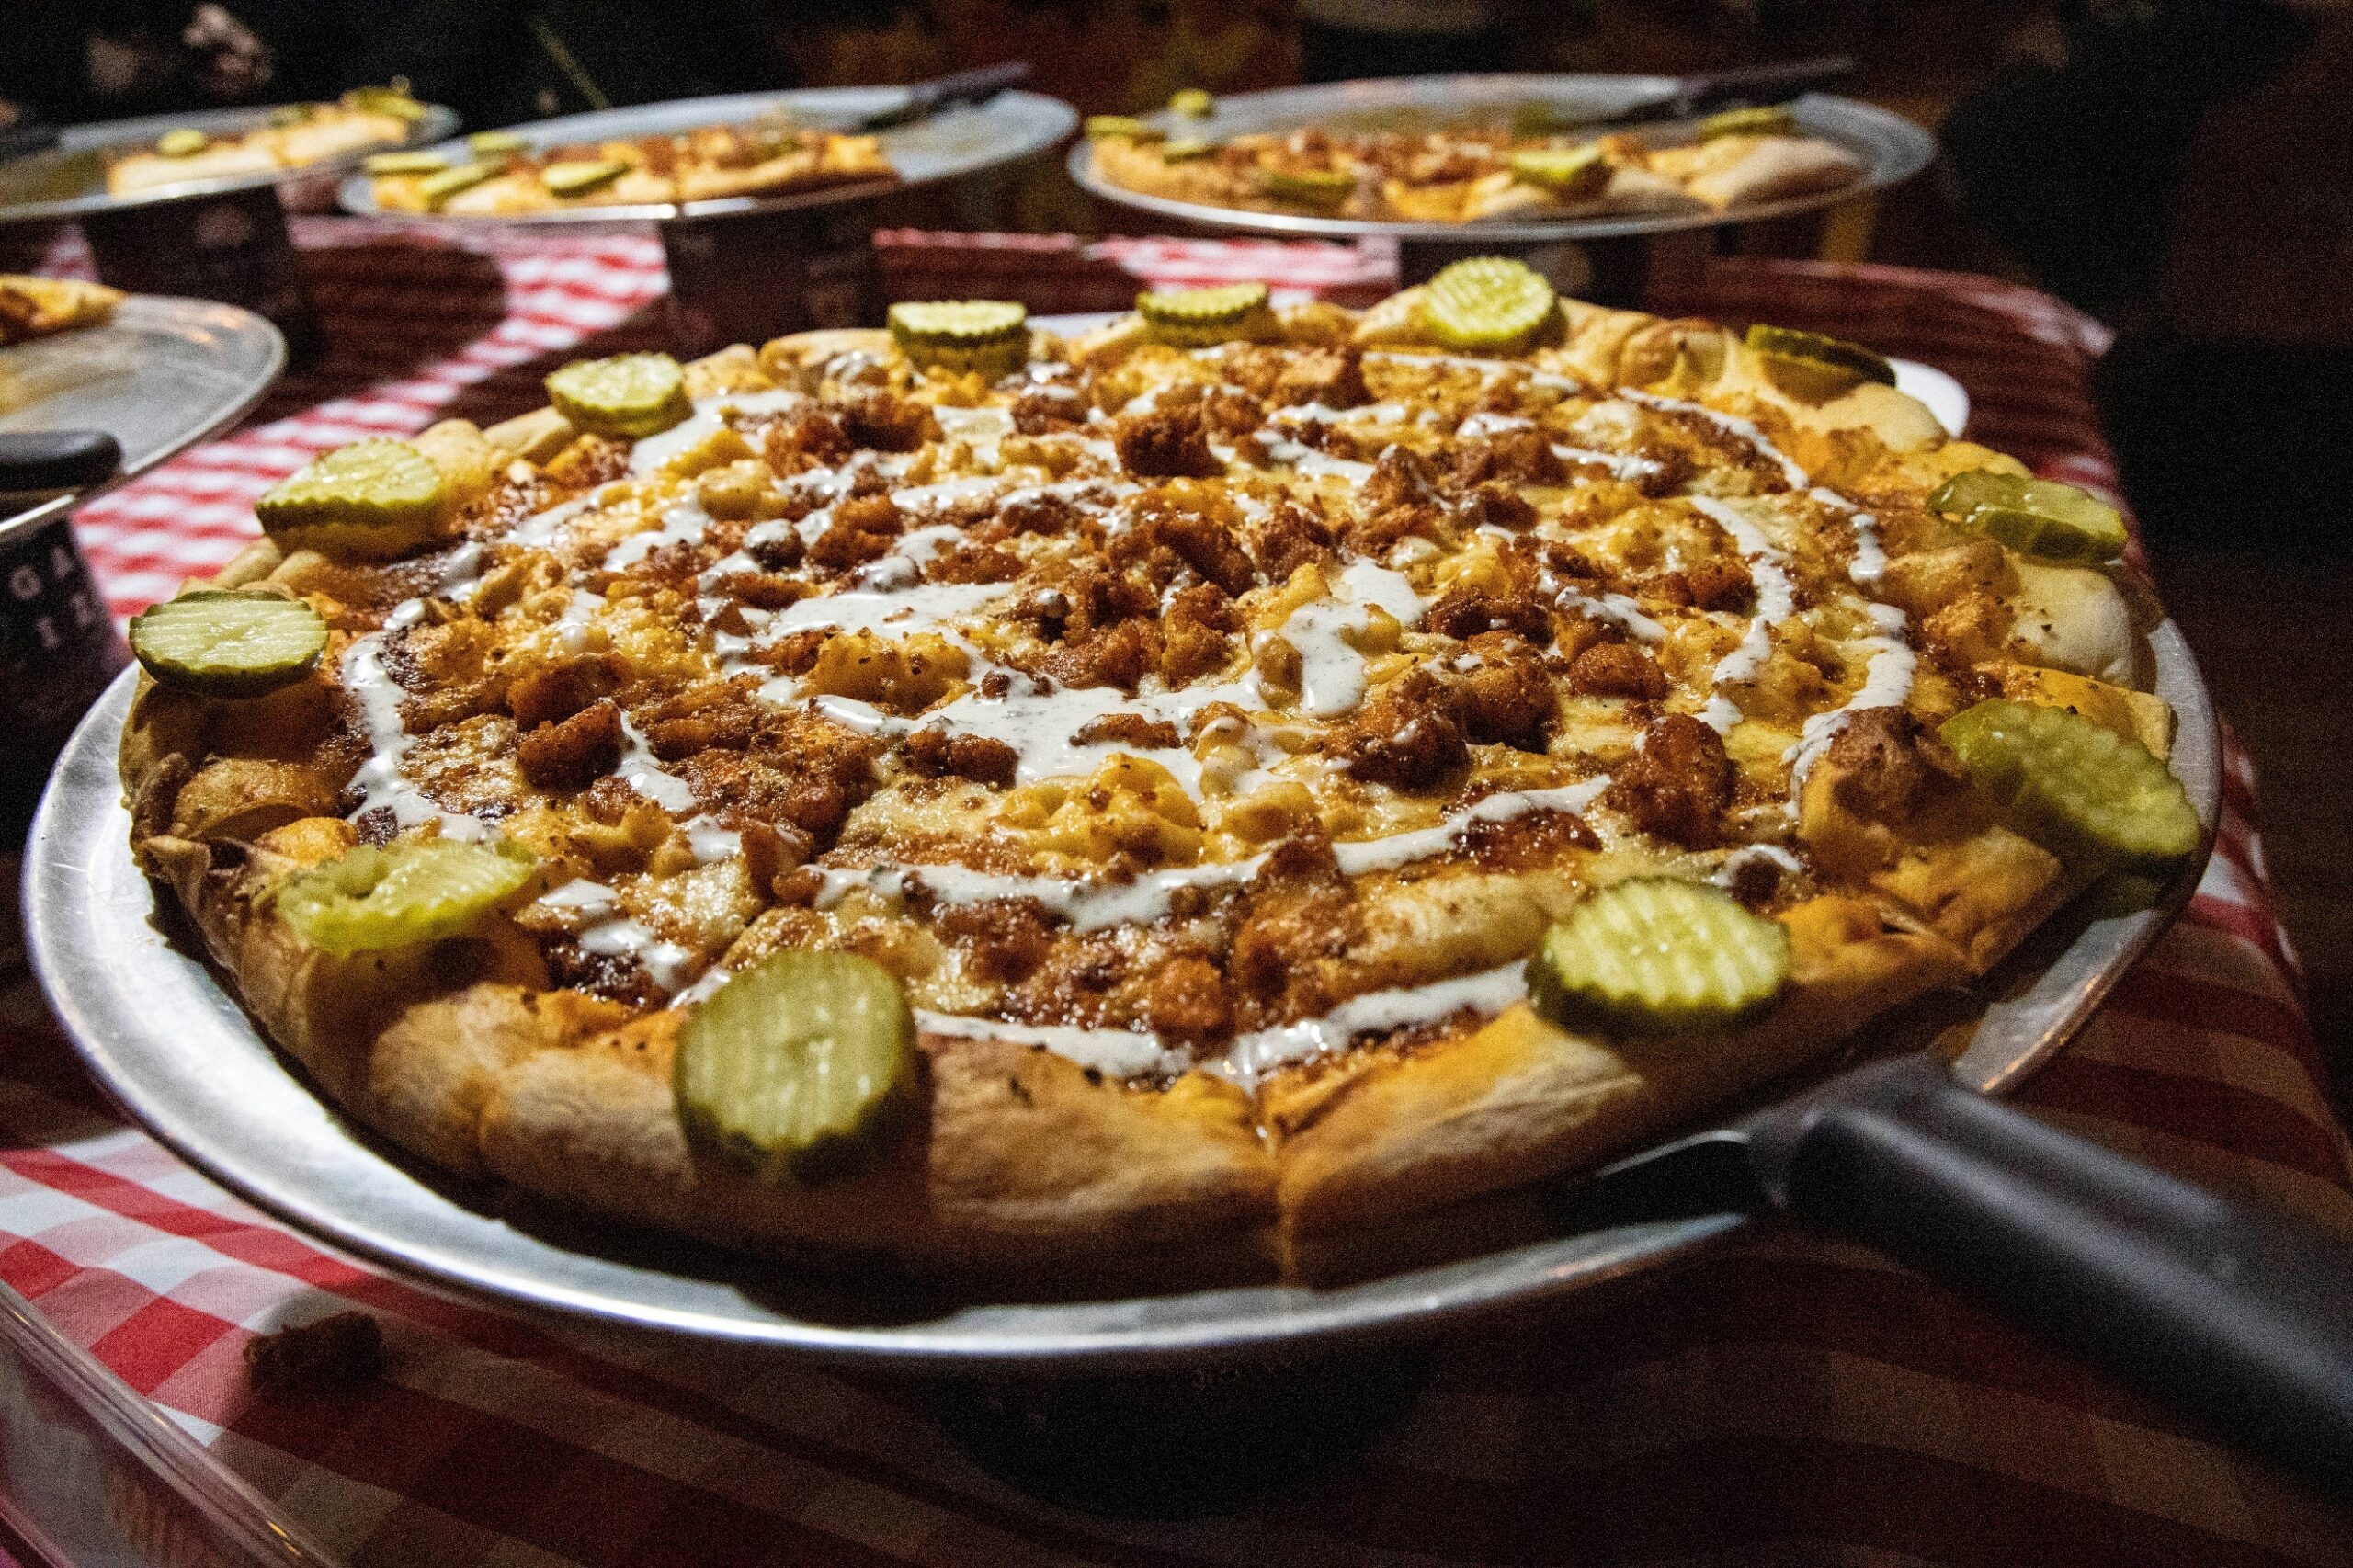 Annual Hot Chicken Takeover & Mikey’s Late Night Slice is BACK for its 8th Year